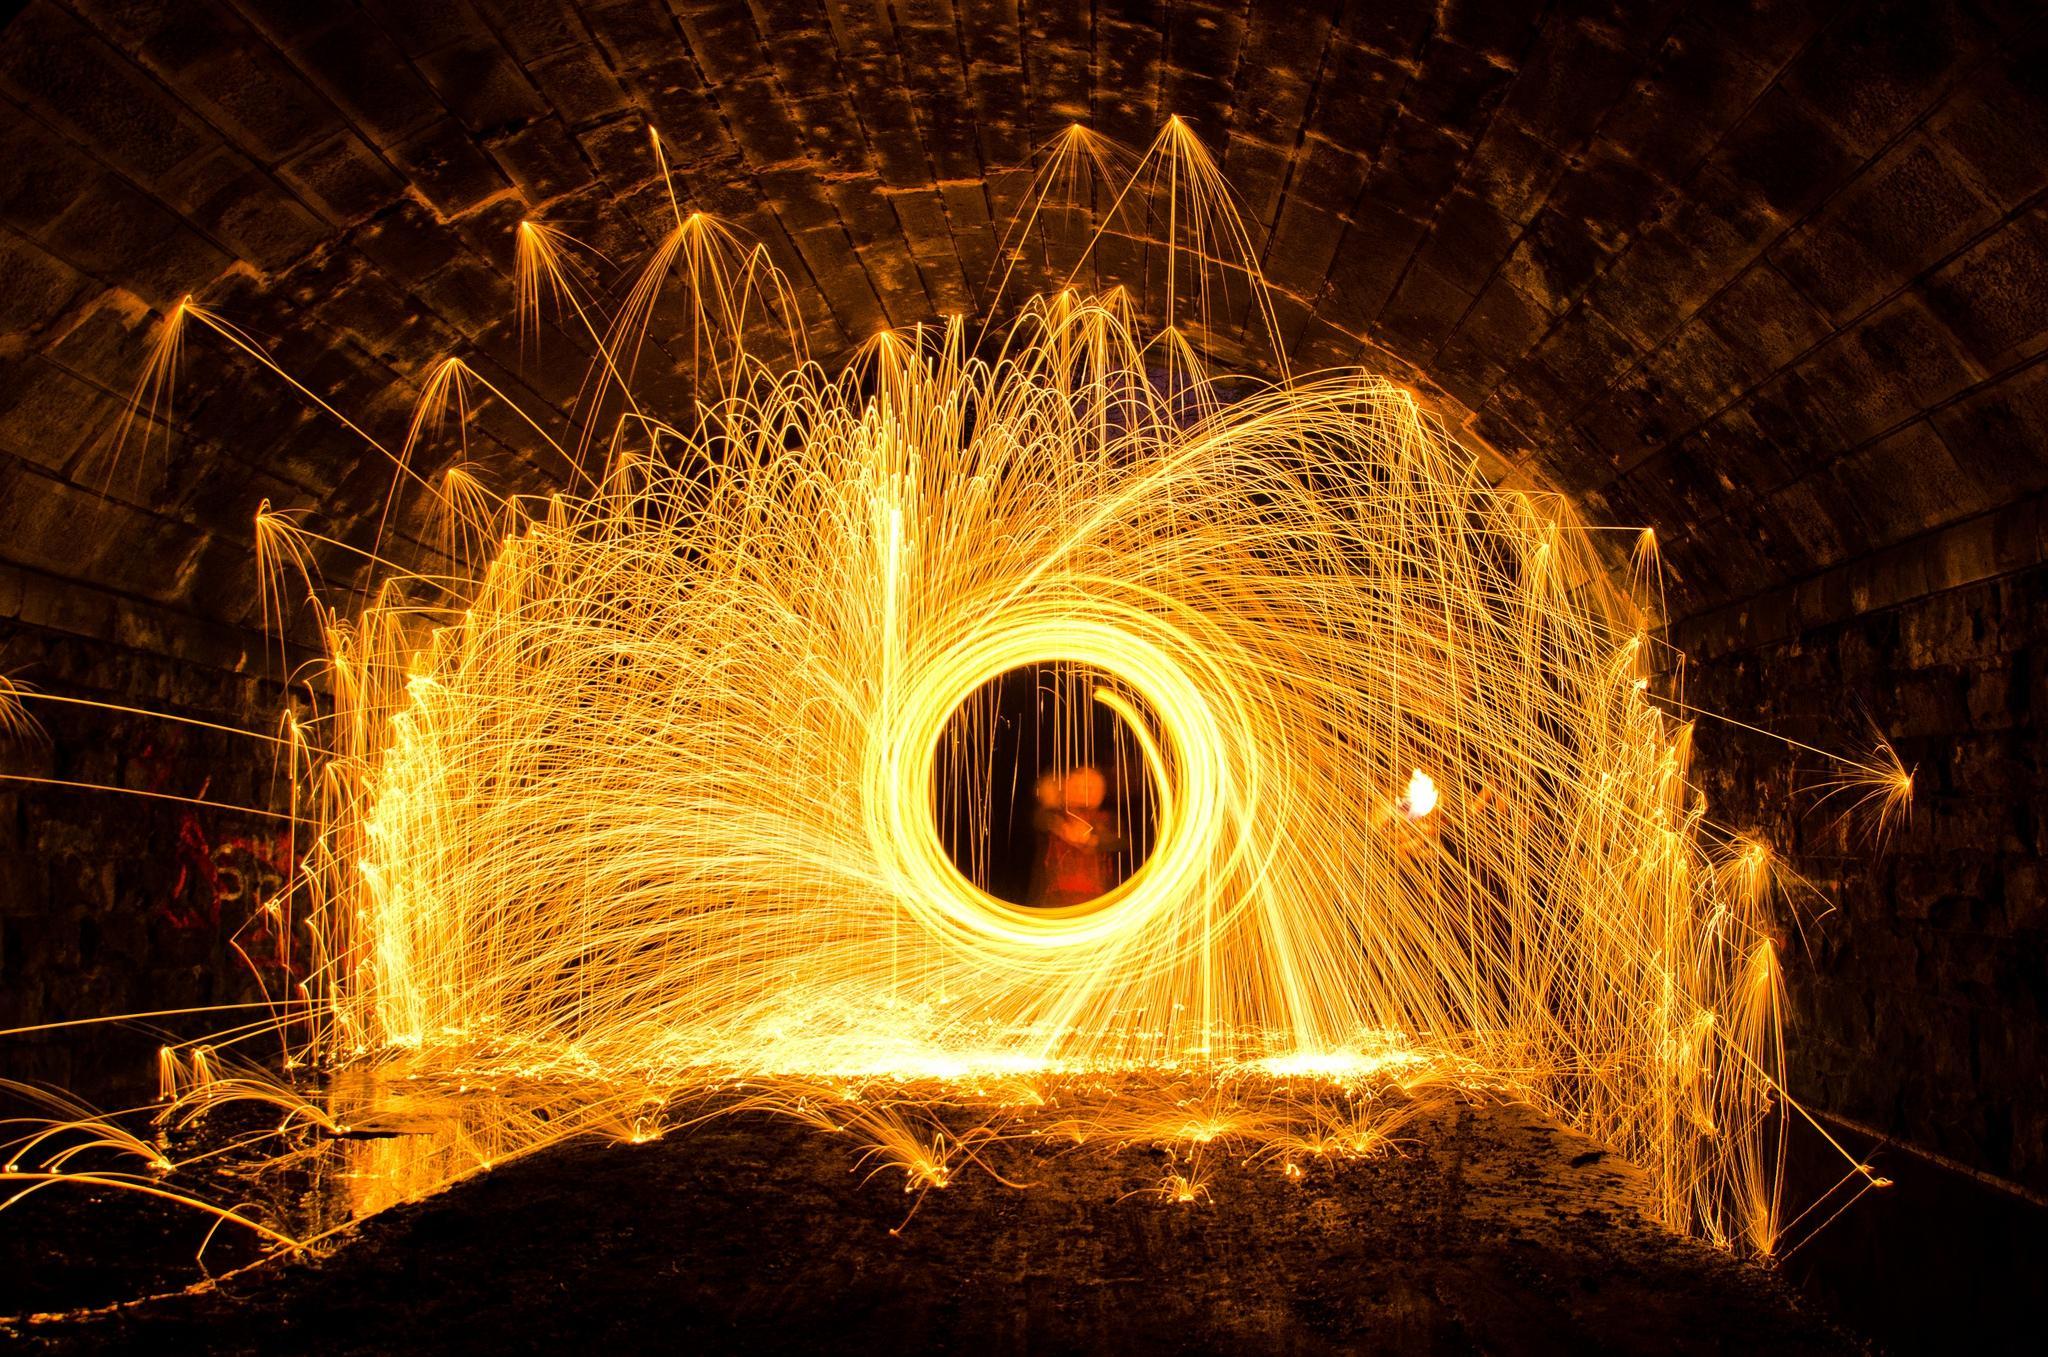 Creating epic long exposure photo with wire wool